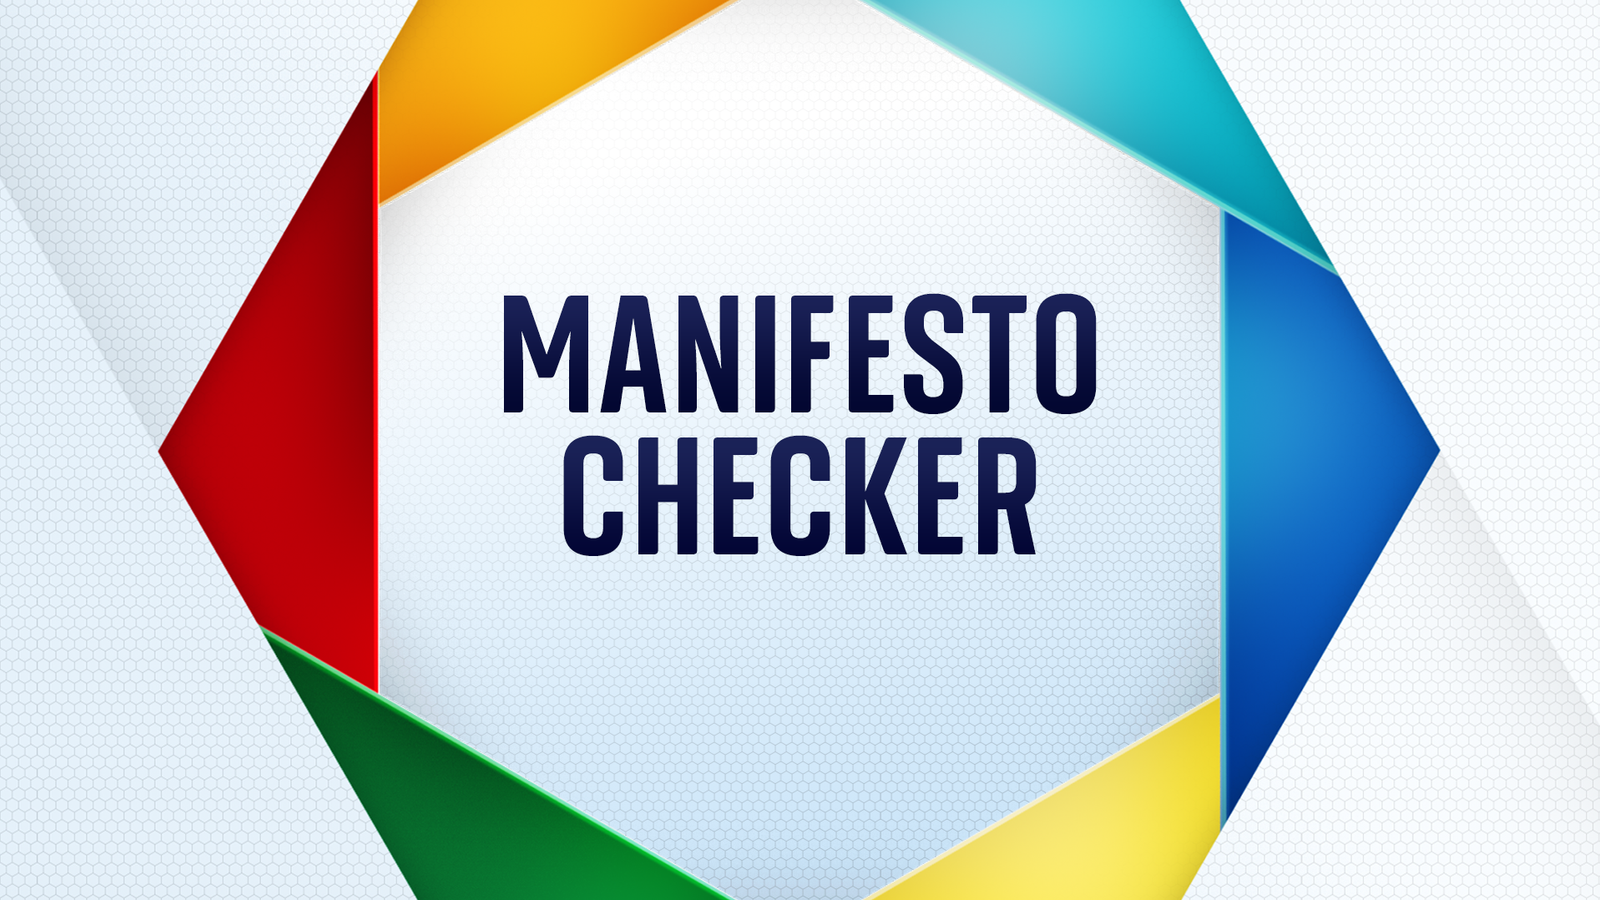 Manifesto checker: What are the Labour, Conservatives', Liberal Democrats', Greens' and Plaid Cymru's key pledges?